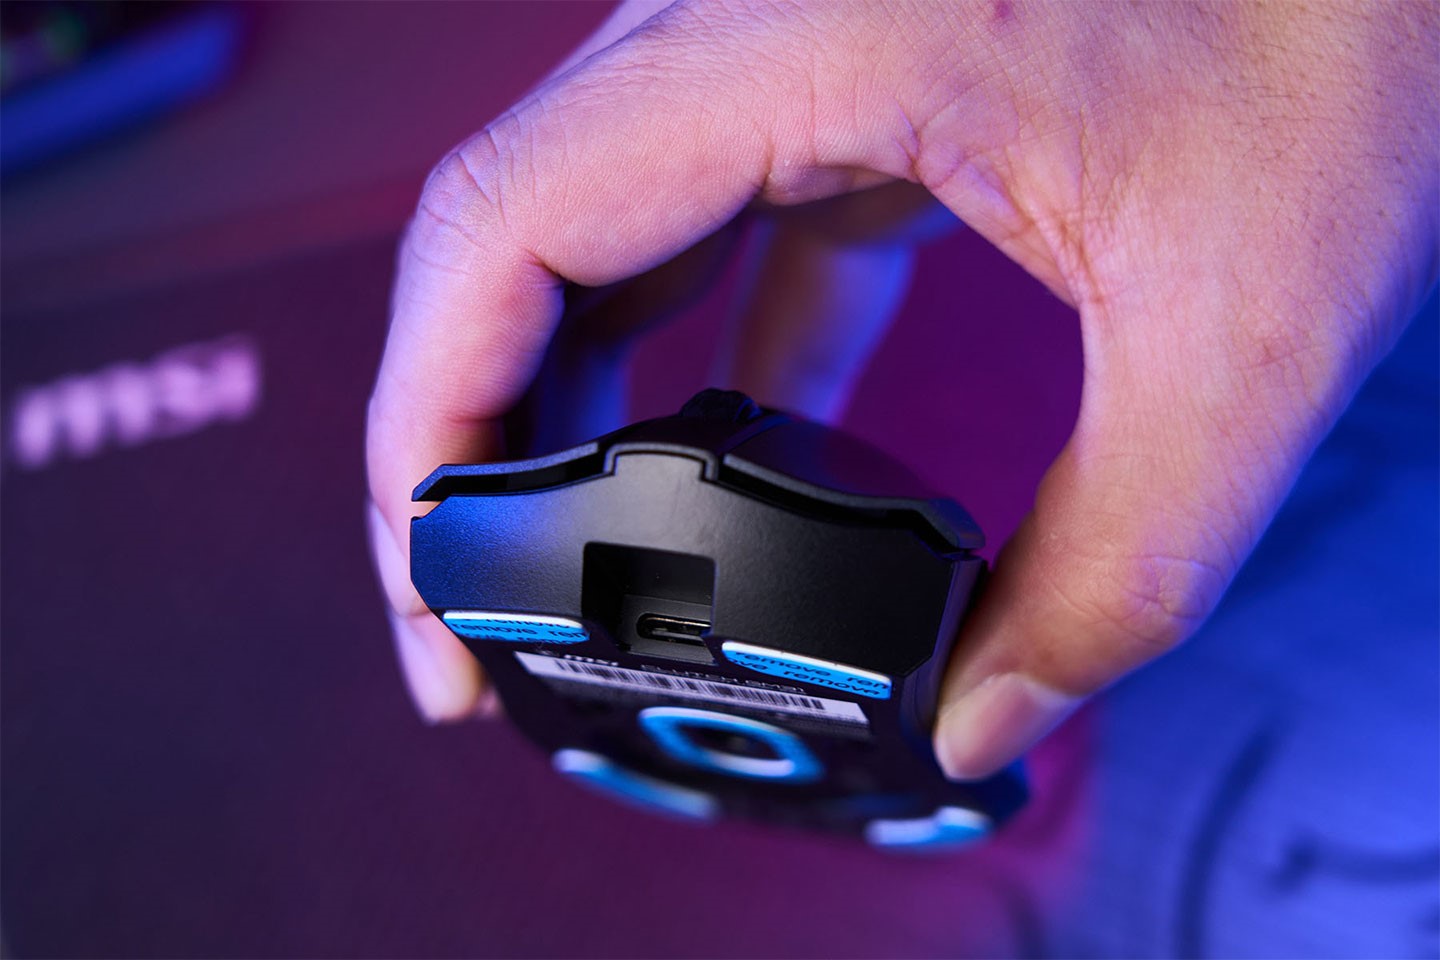 There is also a hidden USB-C interface on the front of the mouse body, which can be converted into a wired form after connecting the cable. It is also an exclusive storage slot design patented by MSI. Put the USB here for storage, and you can take it with you anytime, anywhere .